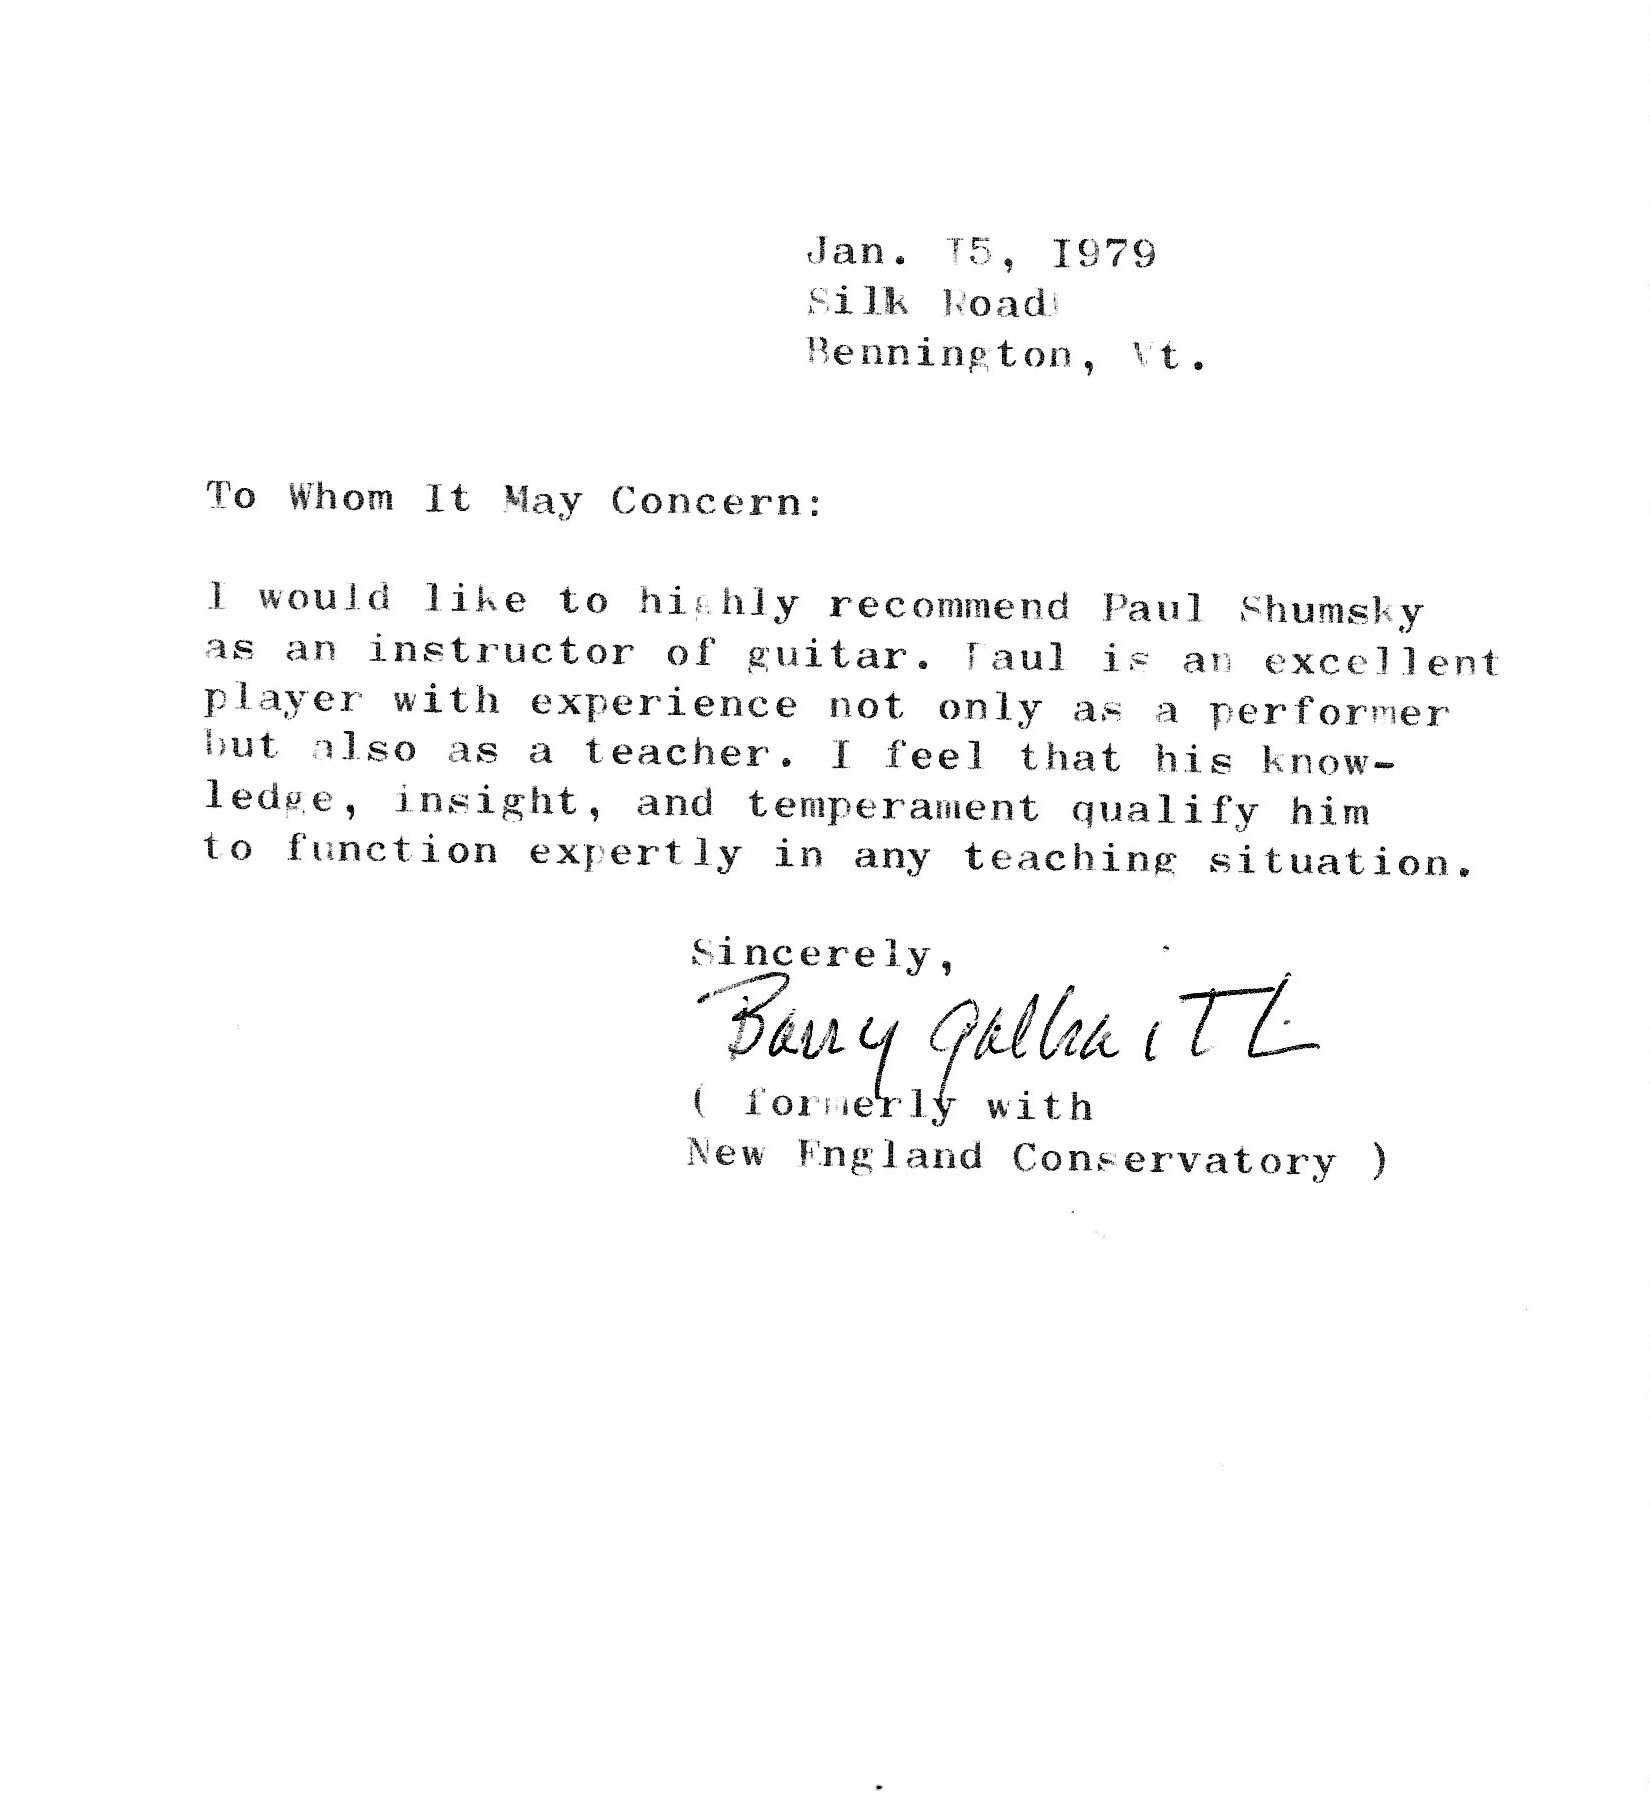 Barry Galbraith also wrote me a letter of recommendation for my first teaching job.